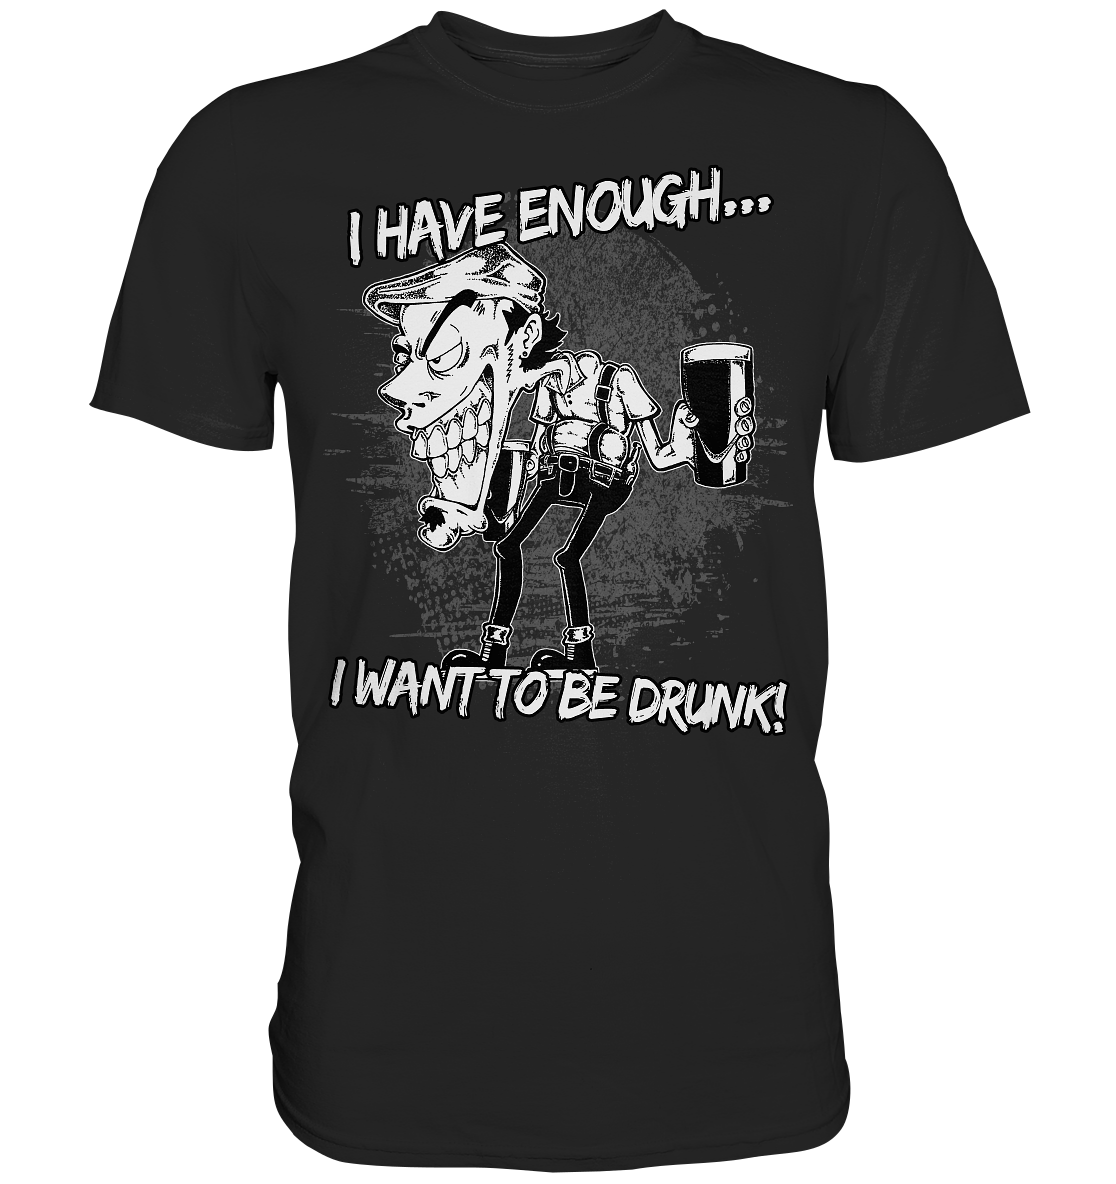 I Have Enough... "I Want To Be Drunk!" - Premium Shirt